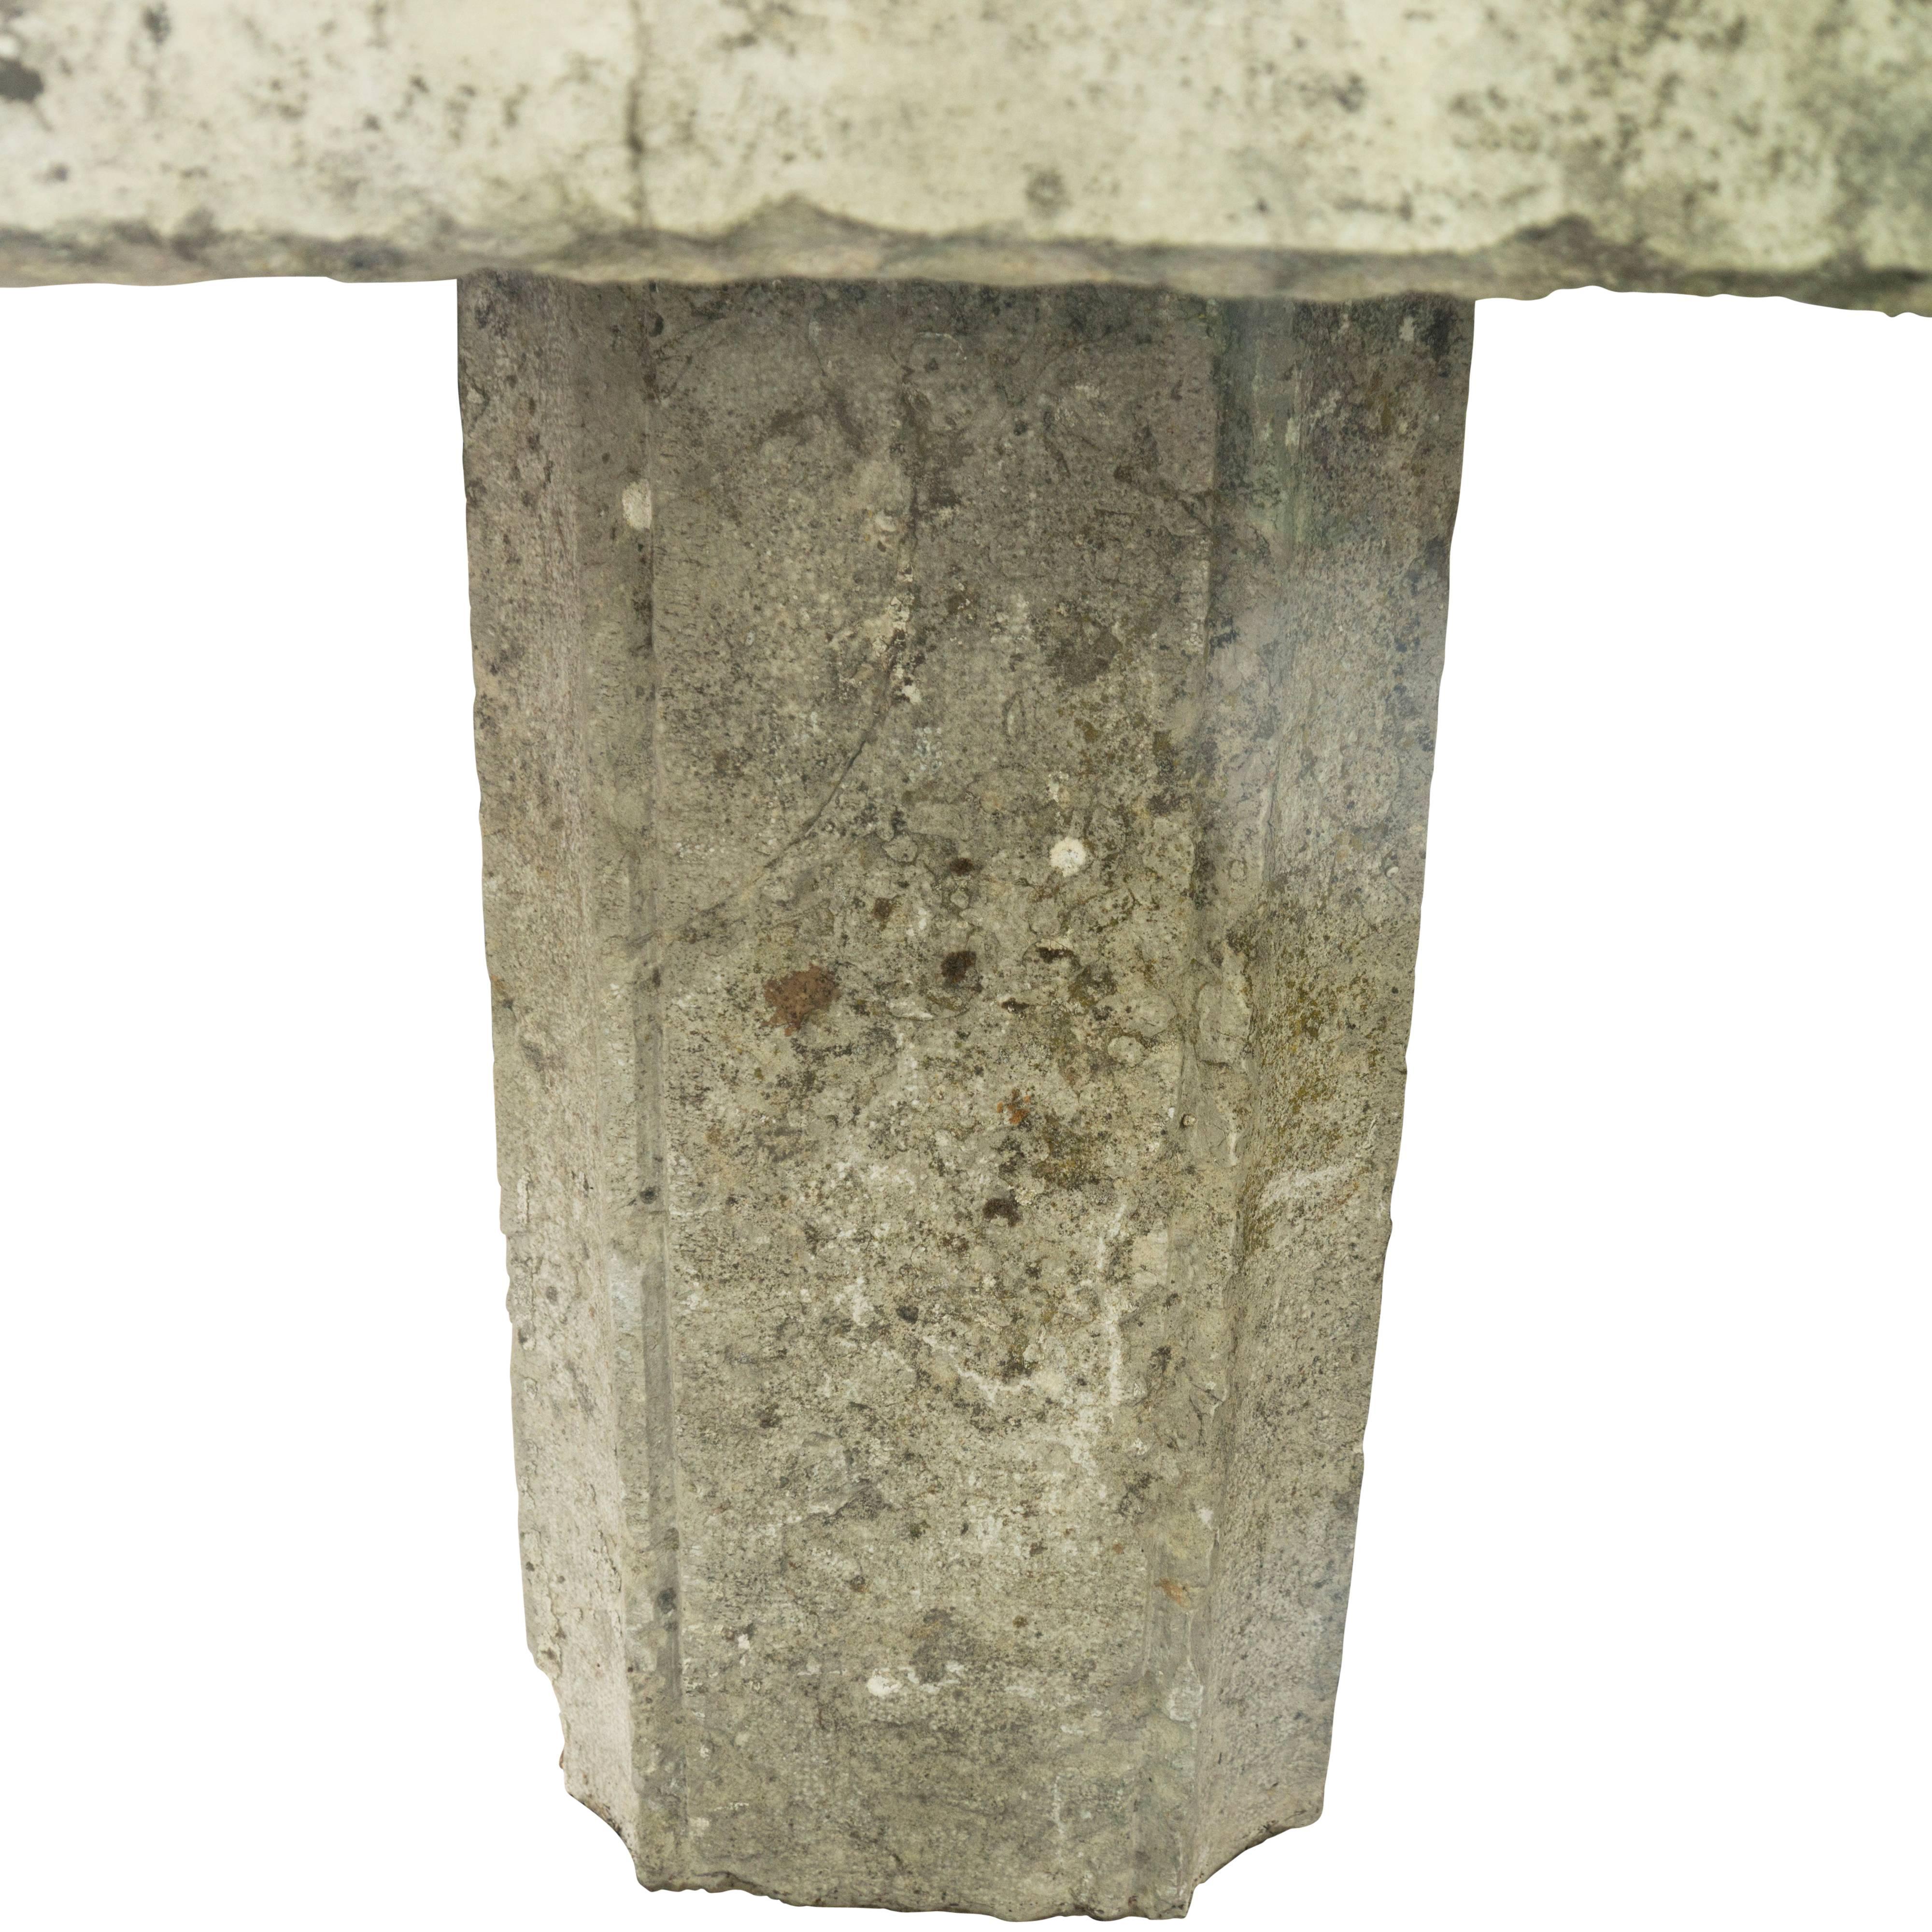 A monumental antique stone garden table, comprised of a massive flattened stone slab table top balanced on a thick pedestal leg. It stands 30 inches tall, which includes a four inch thick stone top and the 26 inch in height base. The base is